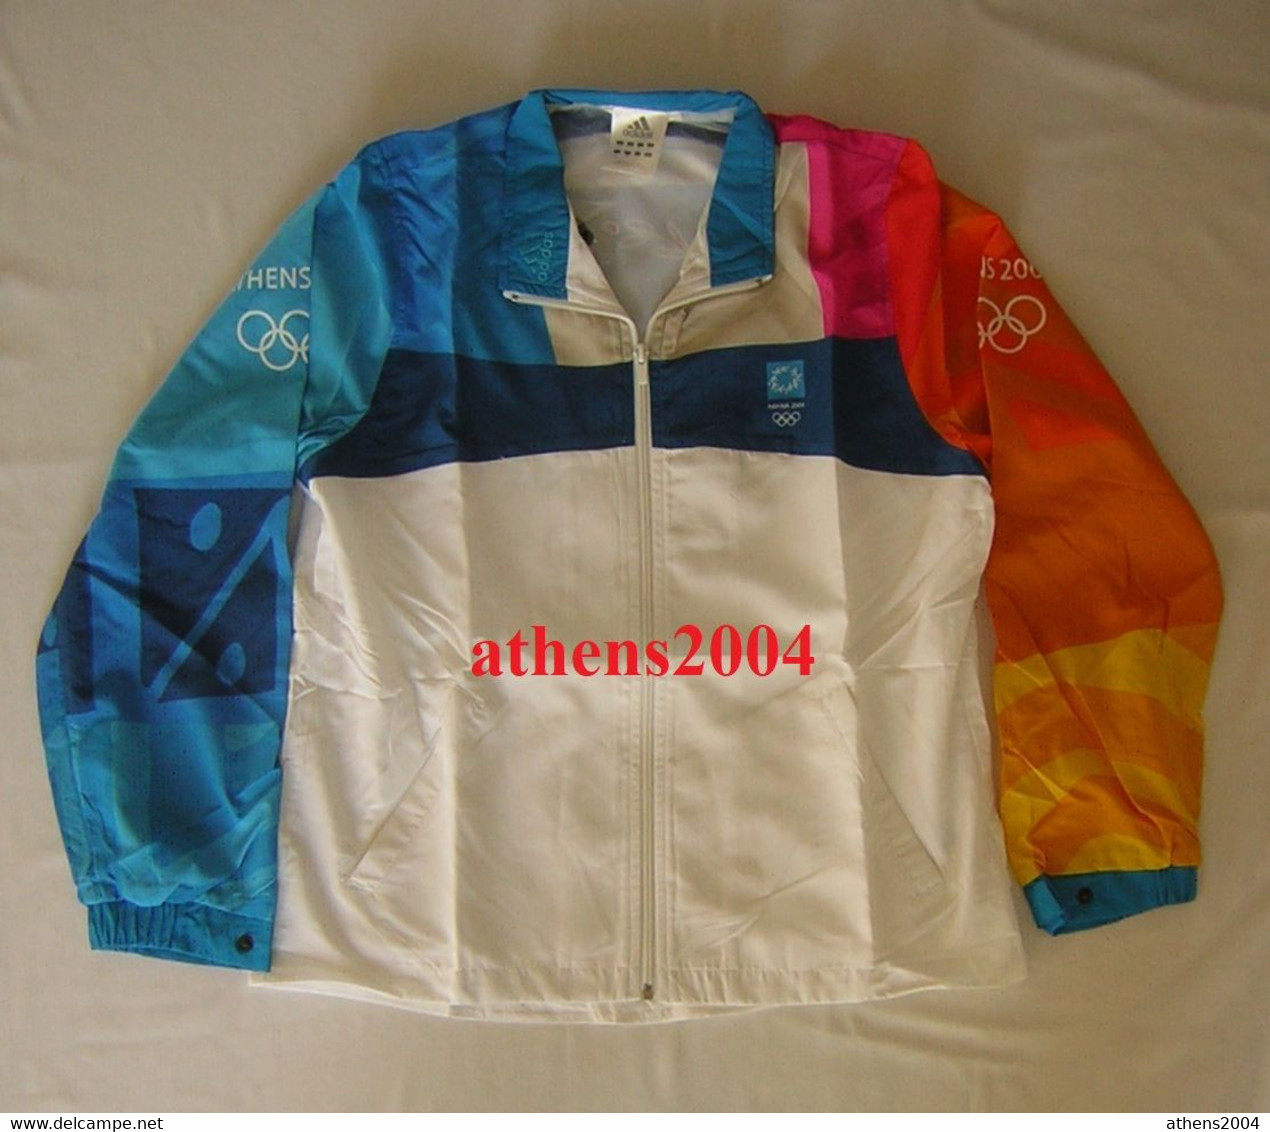 Athens 2004 Olympic Games, Volunteers Jacket A Size Between M&L - Apparel, Souvenirs & Other